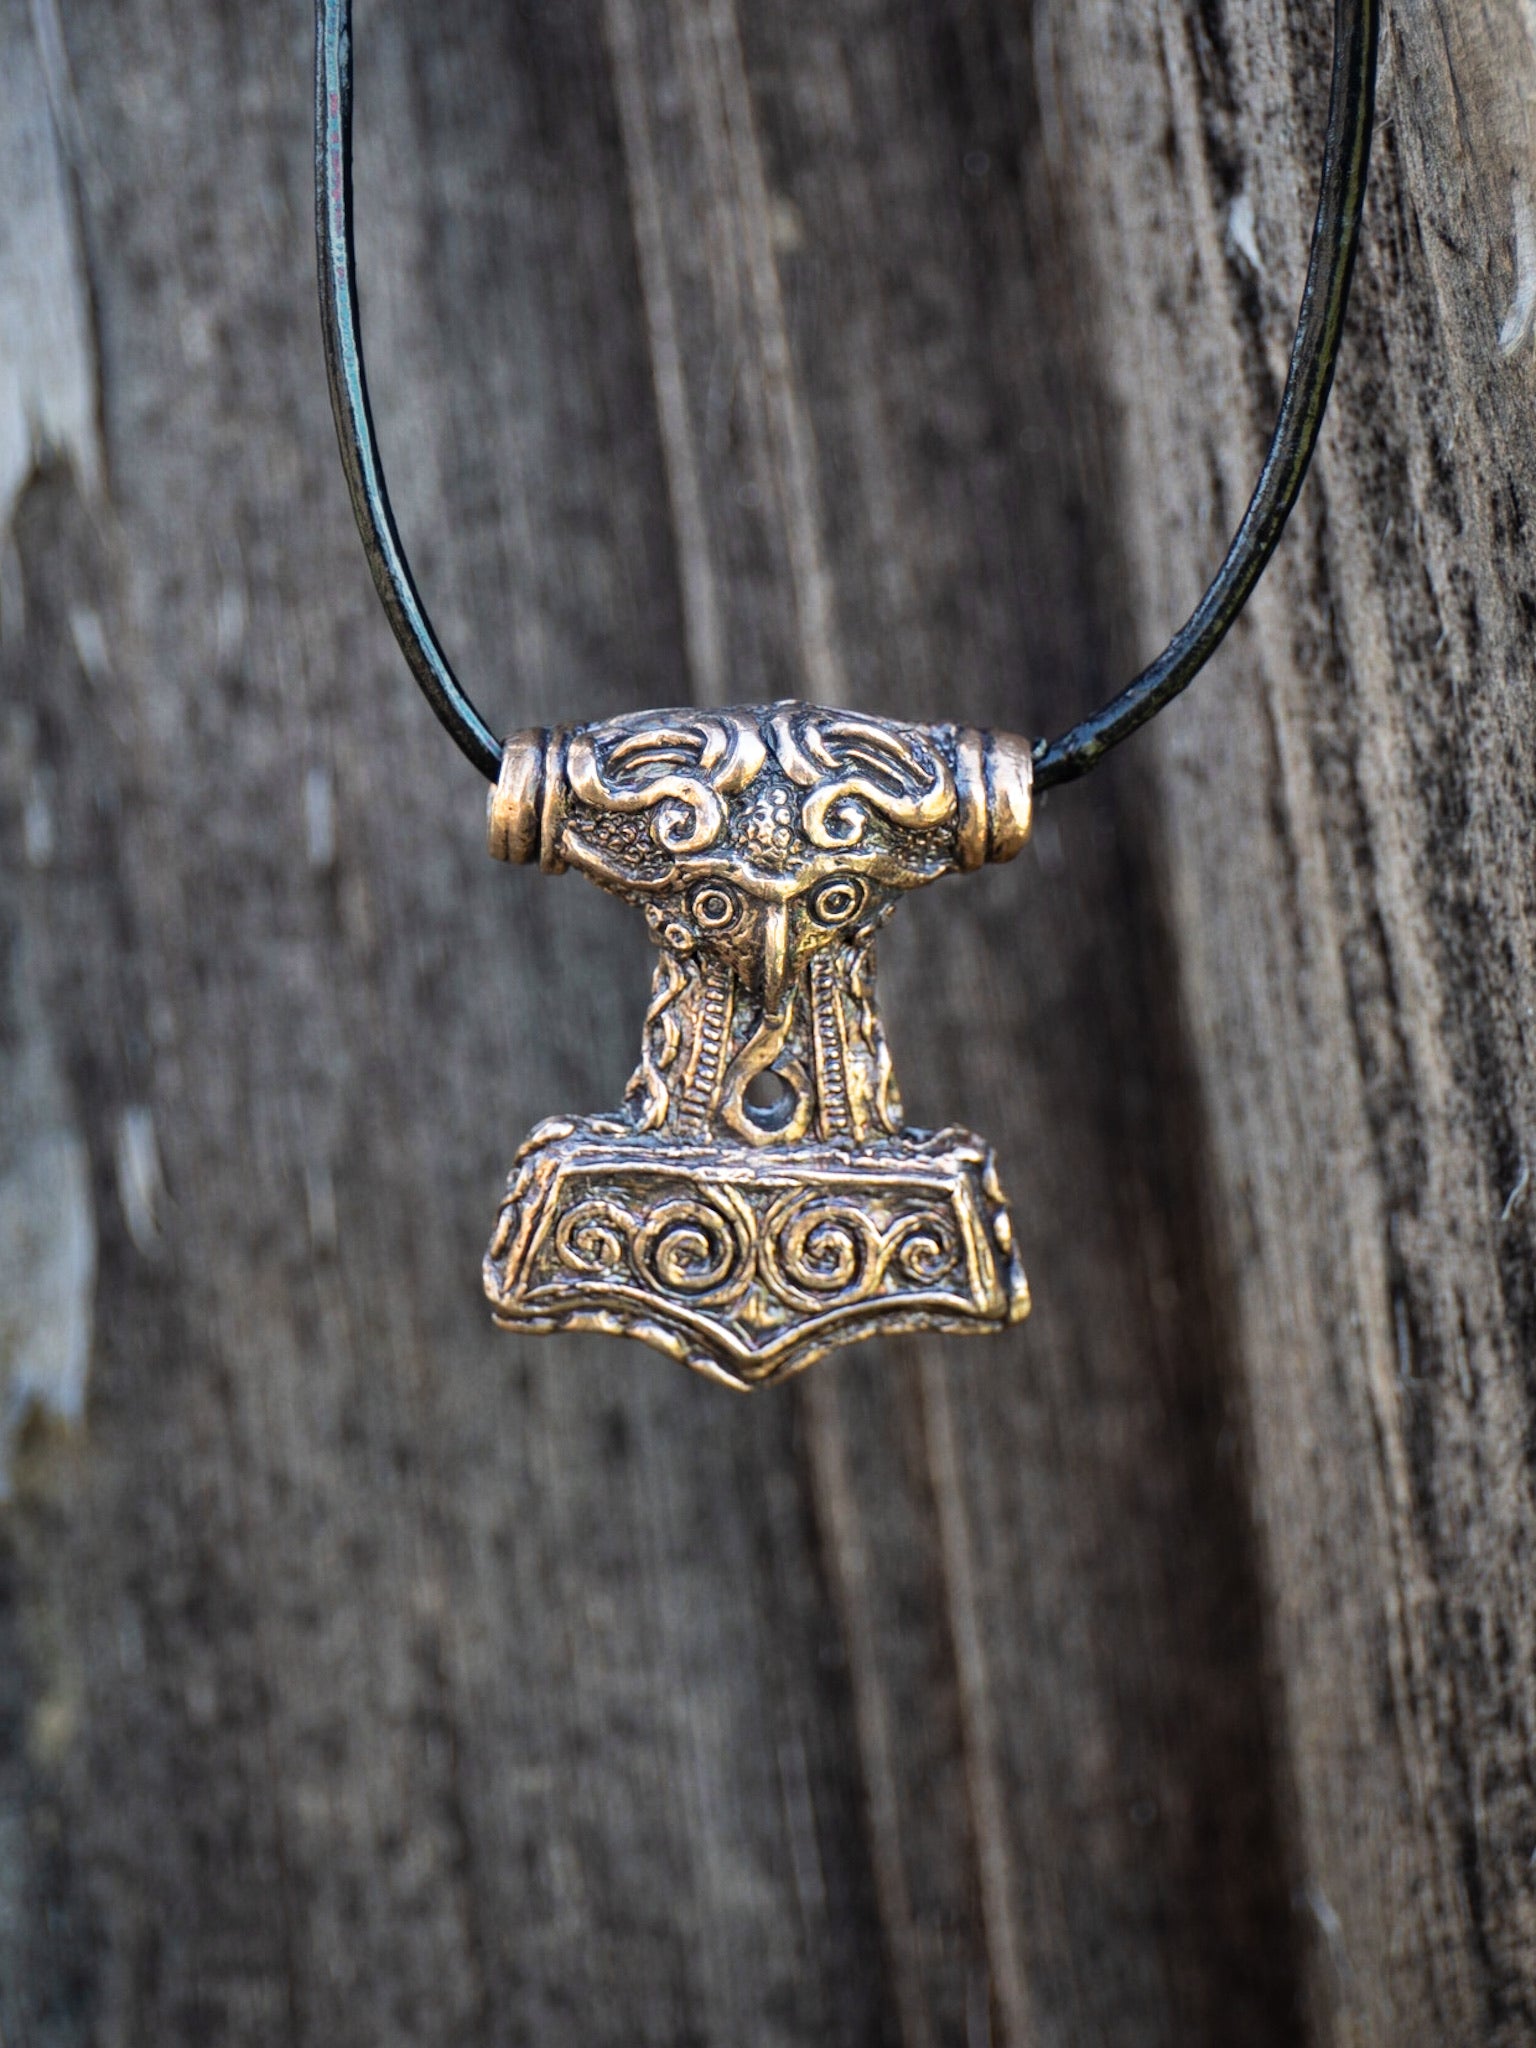 Bronze Mjolnir, Descended from Odin, Wanderers Warriors,Organic T-shirts, Staithes Hoodie, Merino Wool Hoodie, Odin, TYR, Thor, Ragnar, Bjorn Ironside, Vikings, Anglo Saxon, Norse, Fitness Gear, Horns, Jewellery, Silver